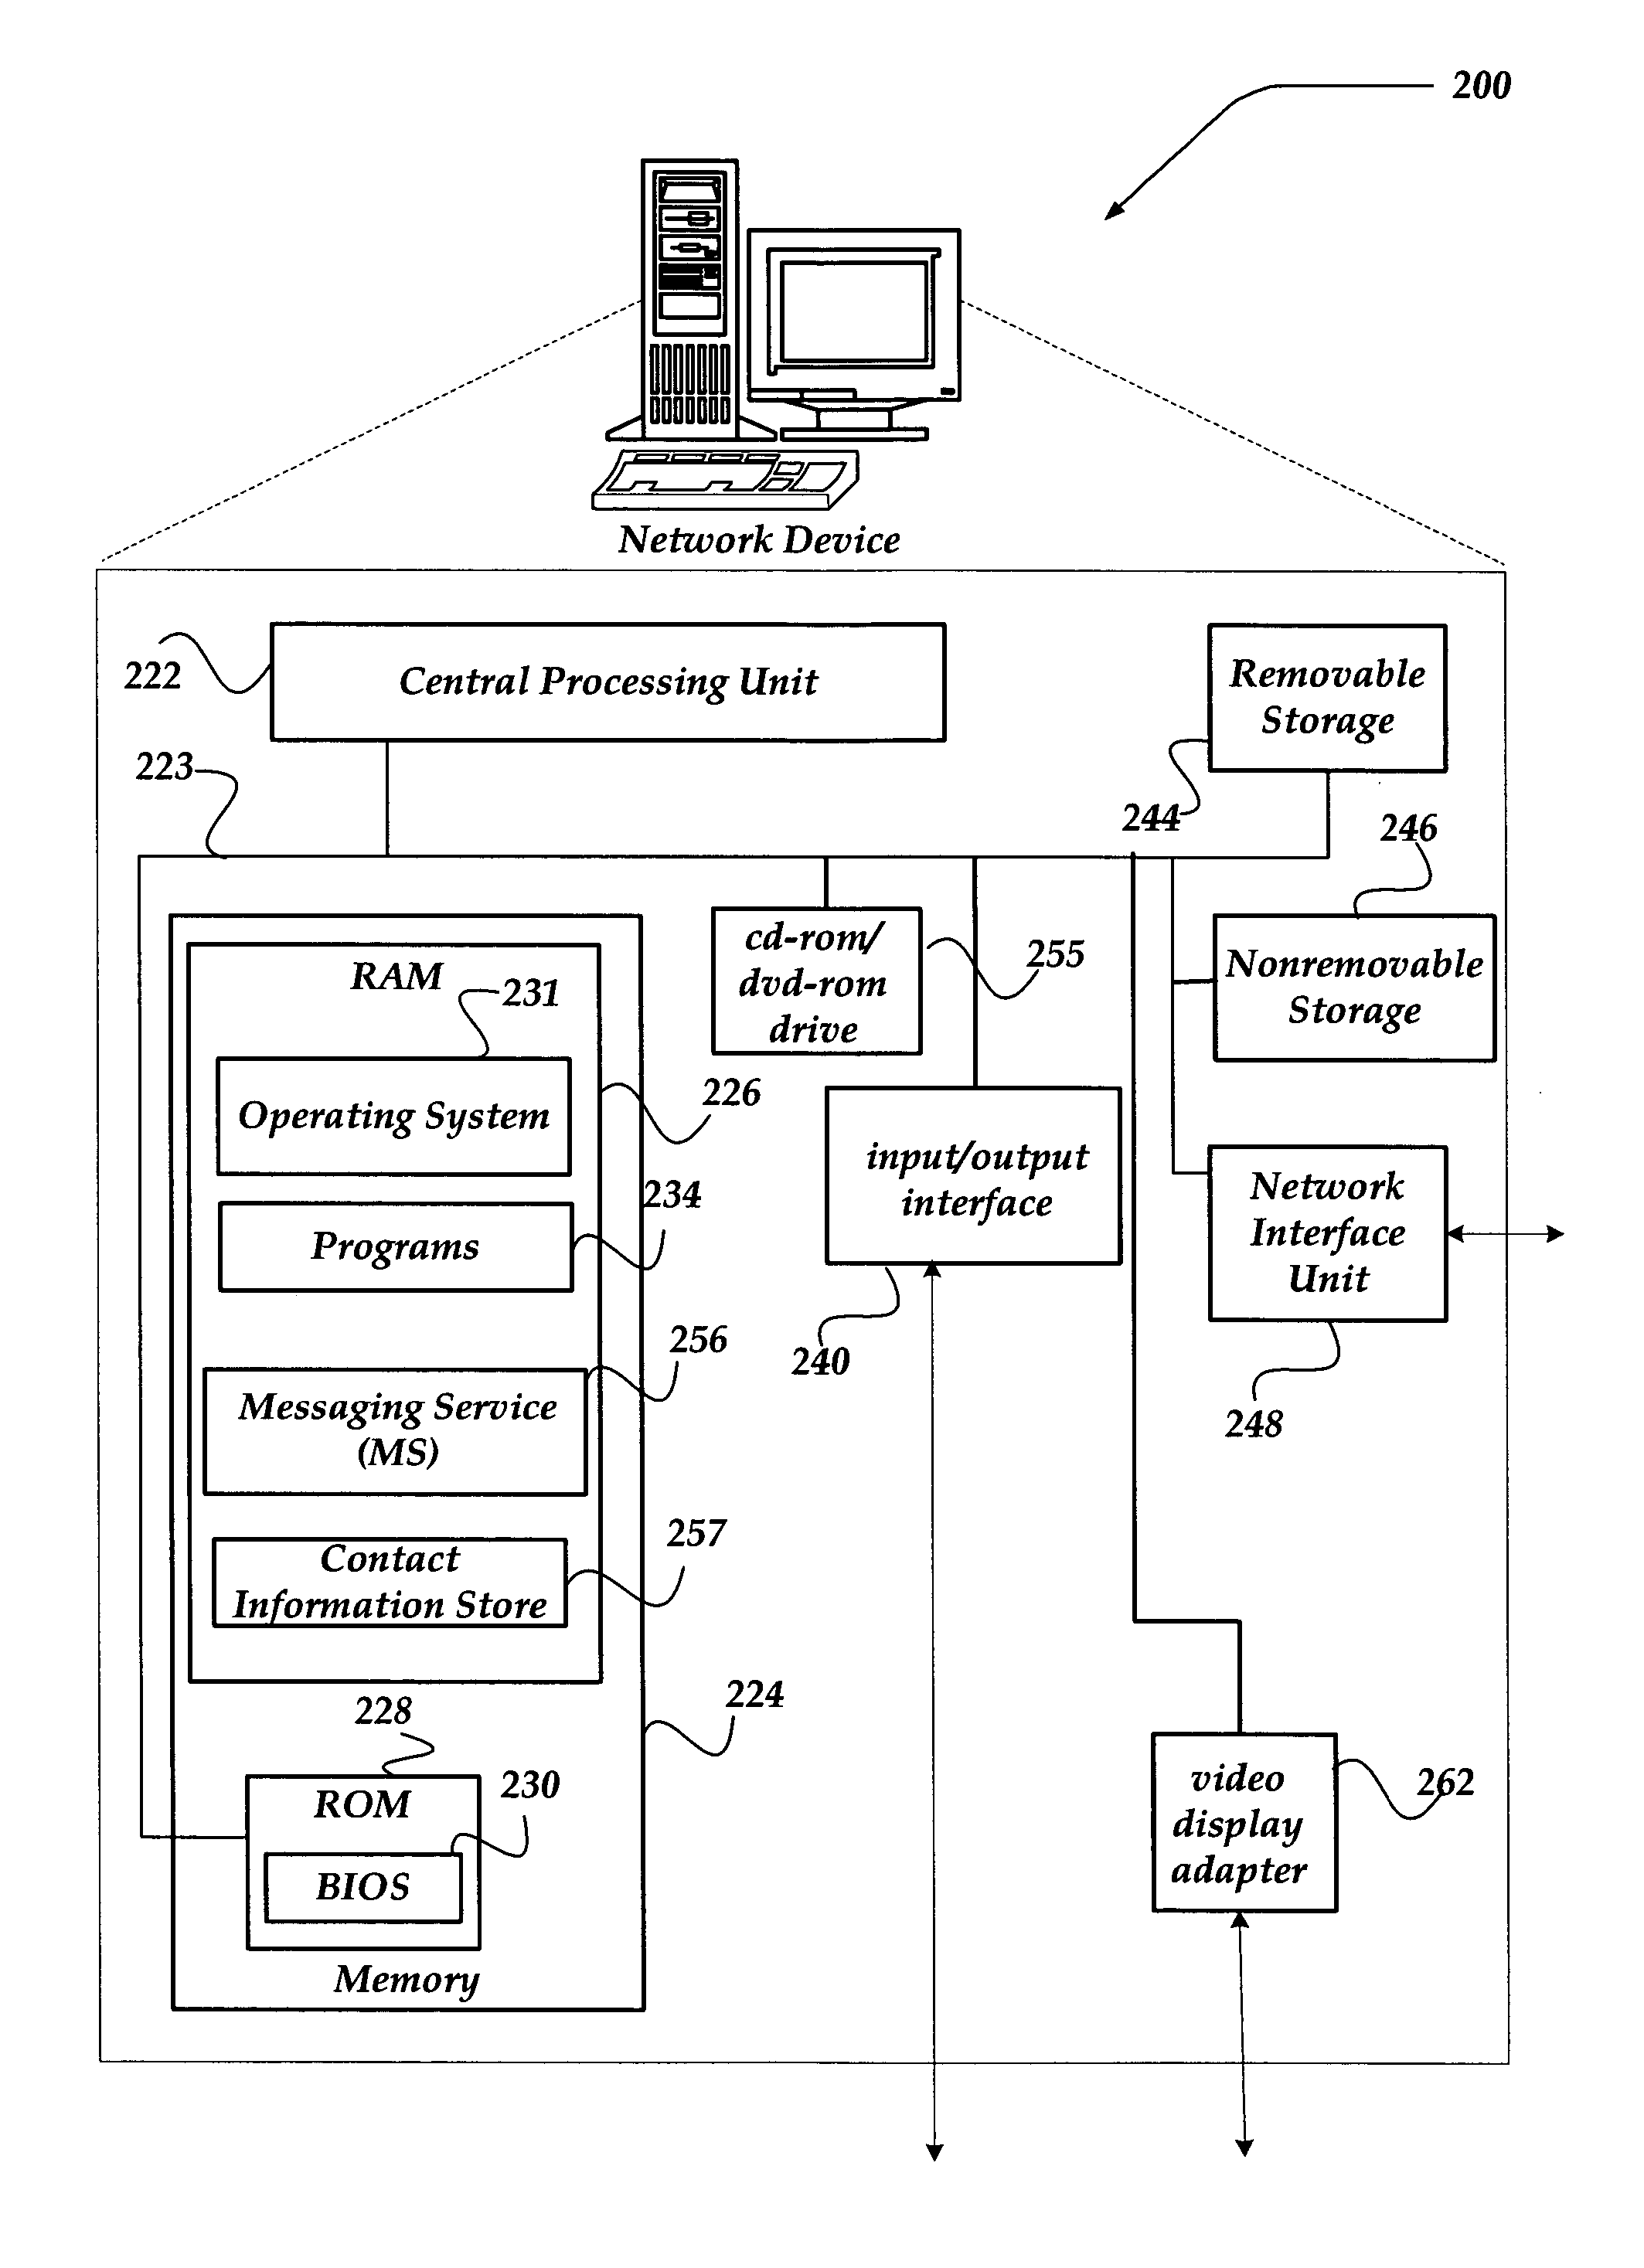 Multi-modal auto complete function for a connection